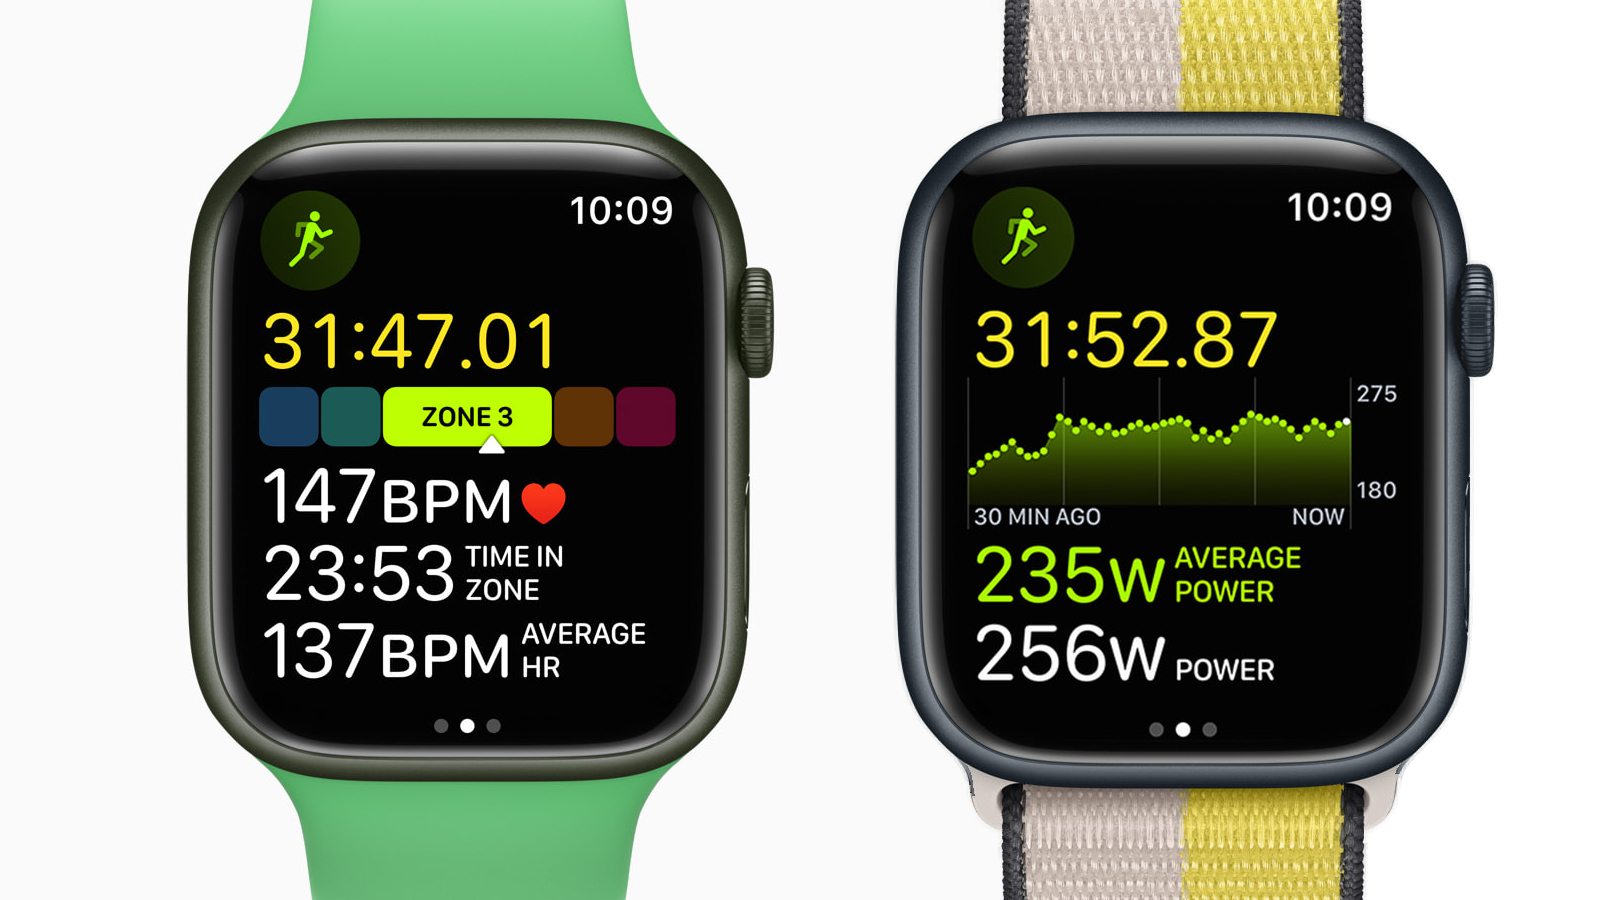 Two Apple Watches with new running data